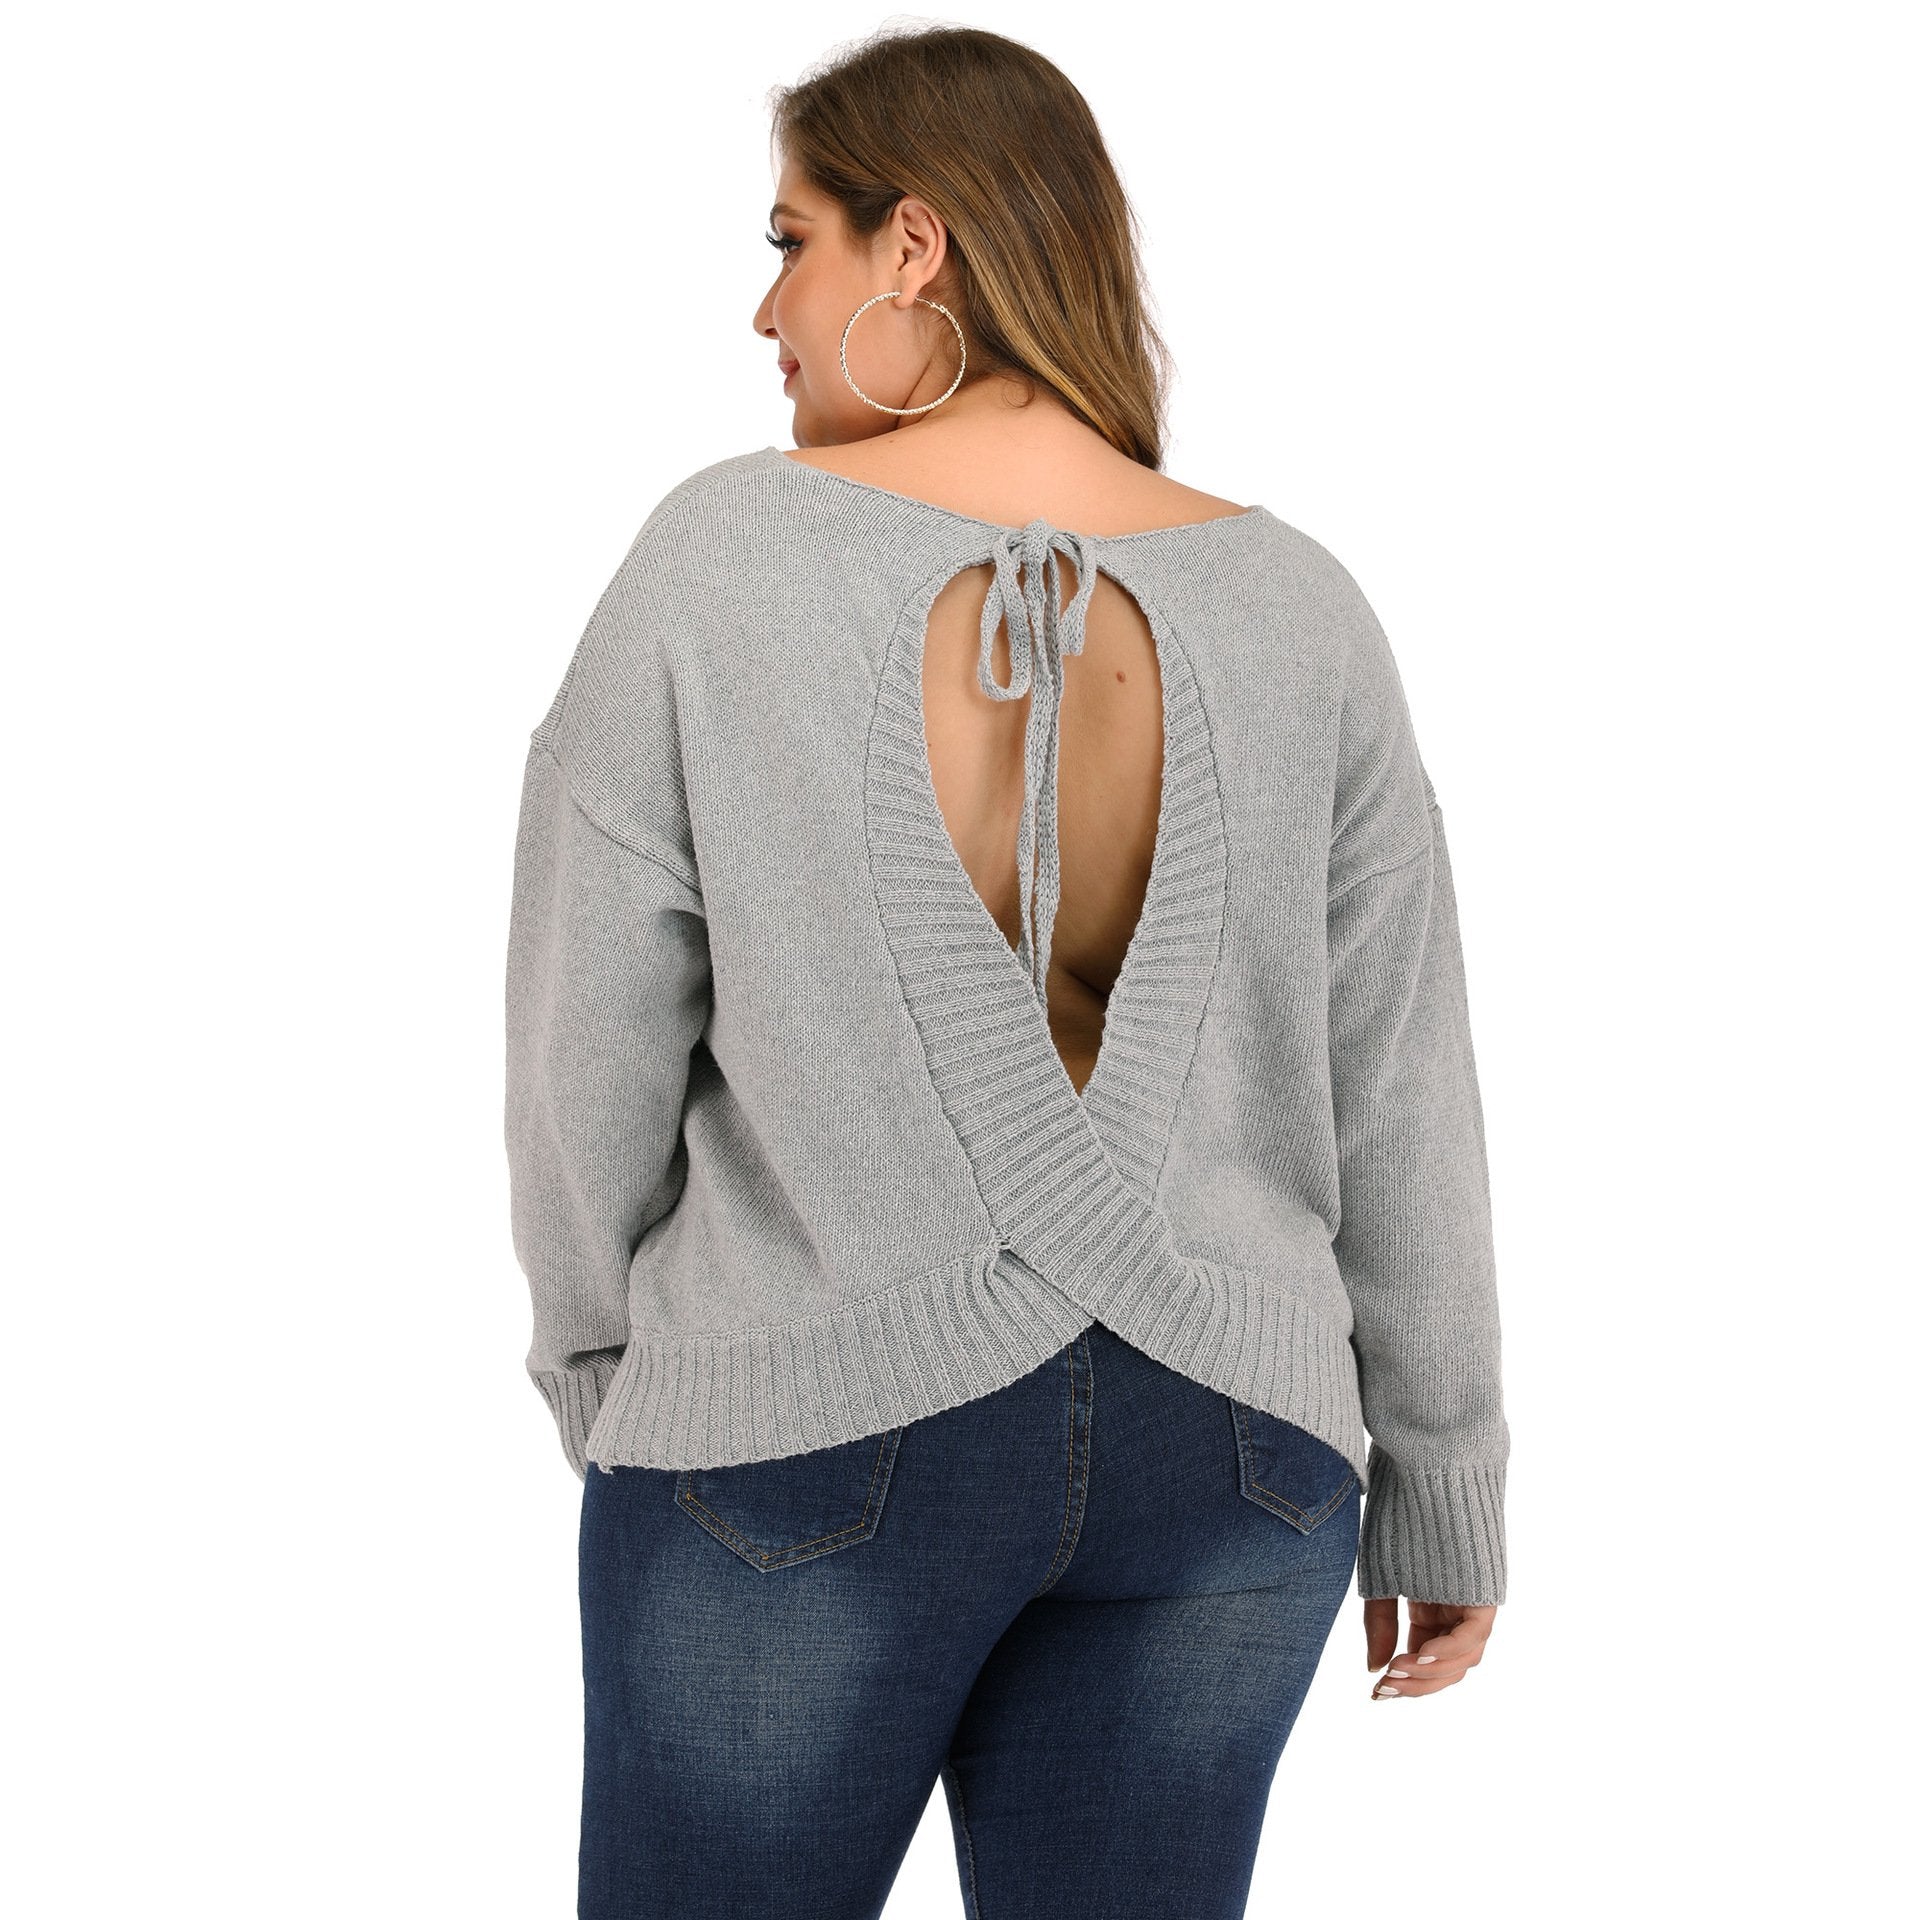 Gray Women Backless Plus Size Sweatrers-STYLEGOING